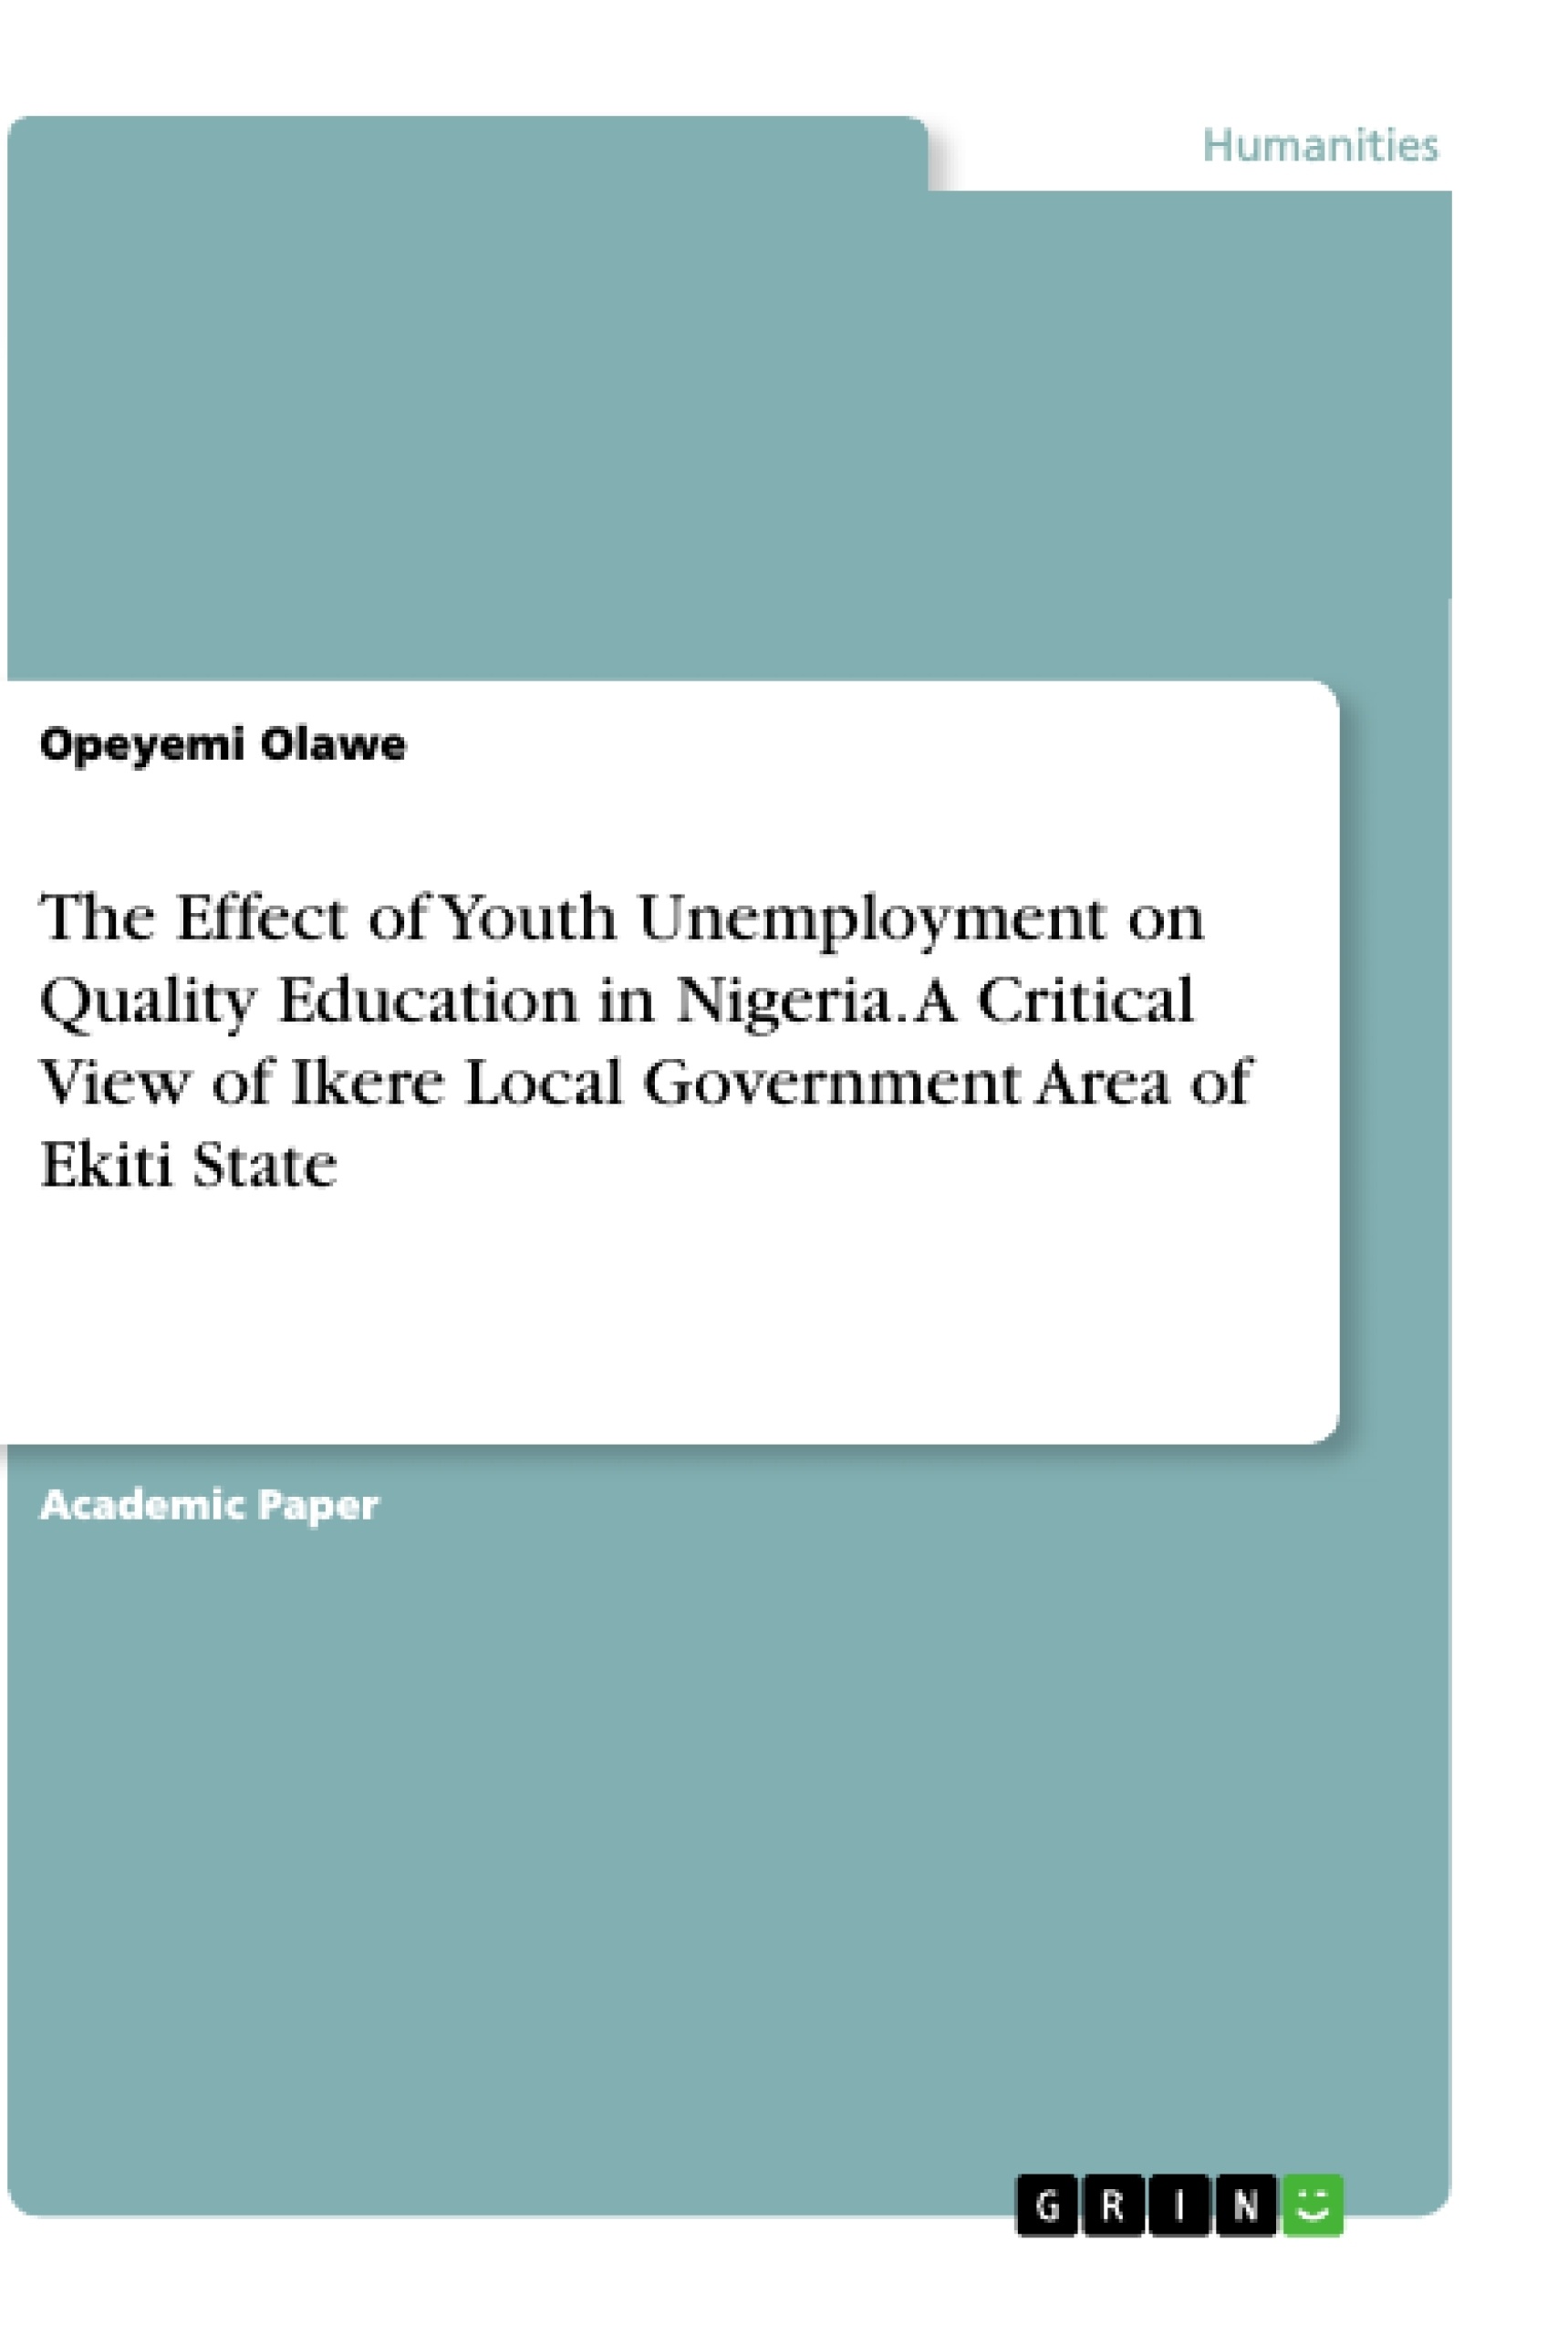 Título: The Effect of Youth Unemployment on Quality Education in Nigeria. A Critical View of Ikere Local Government Area of Ekiti State